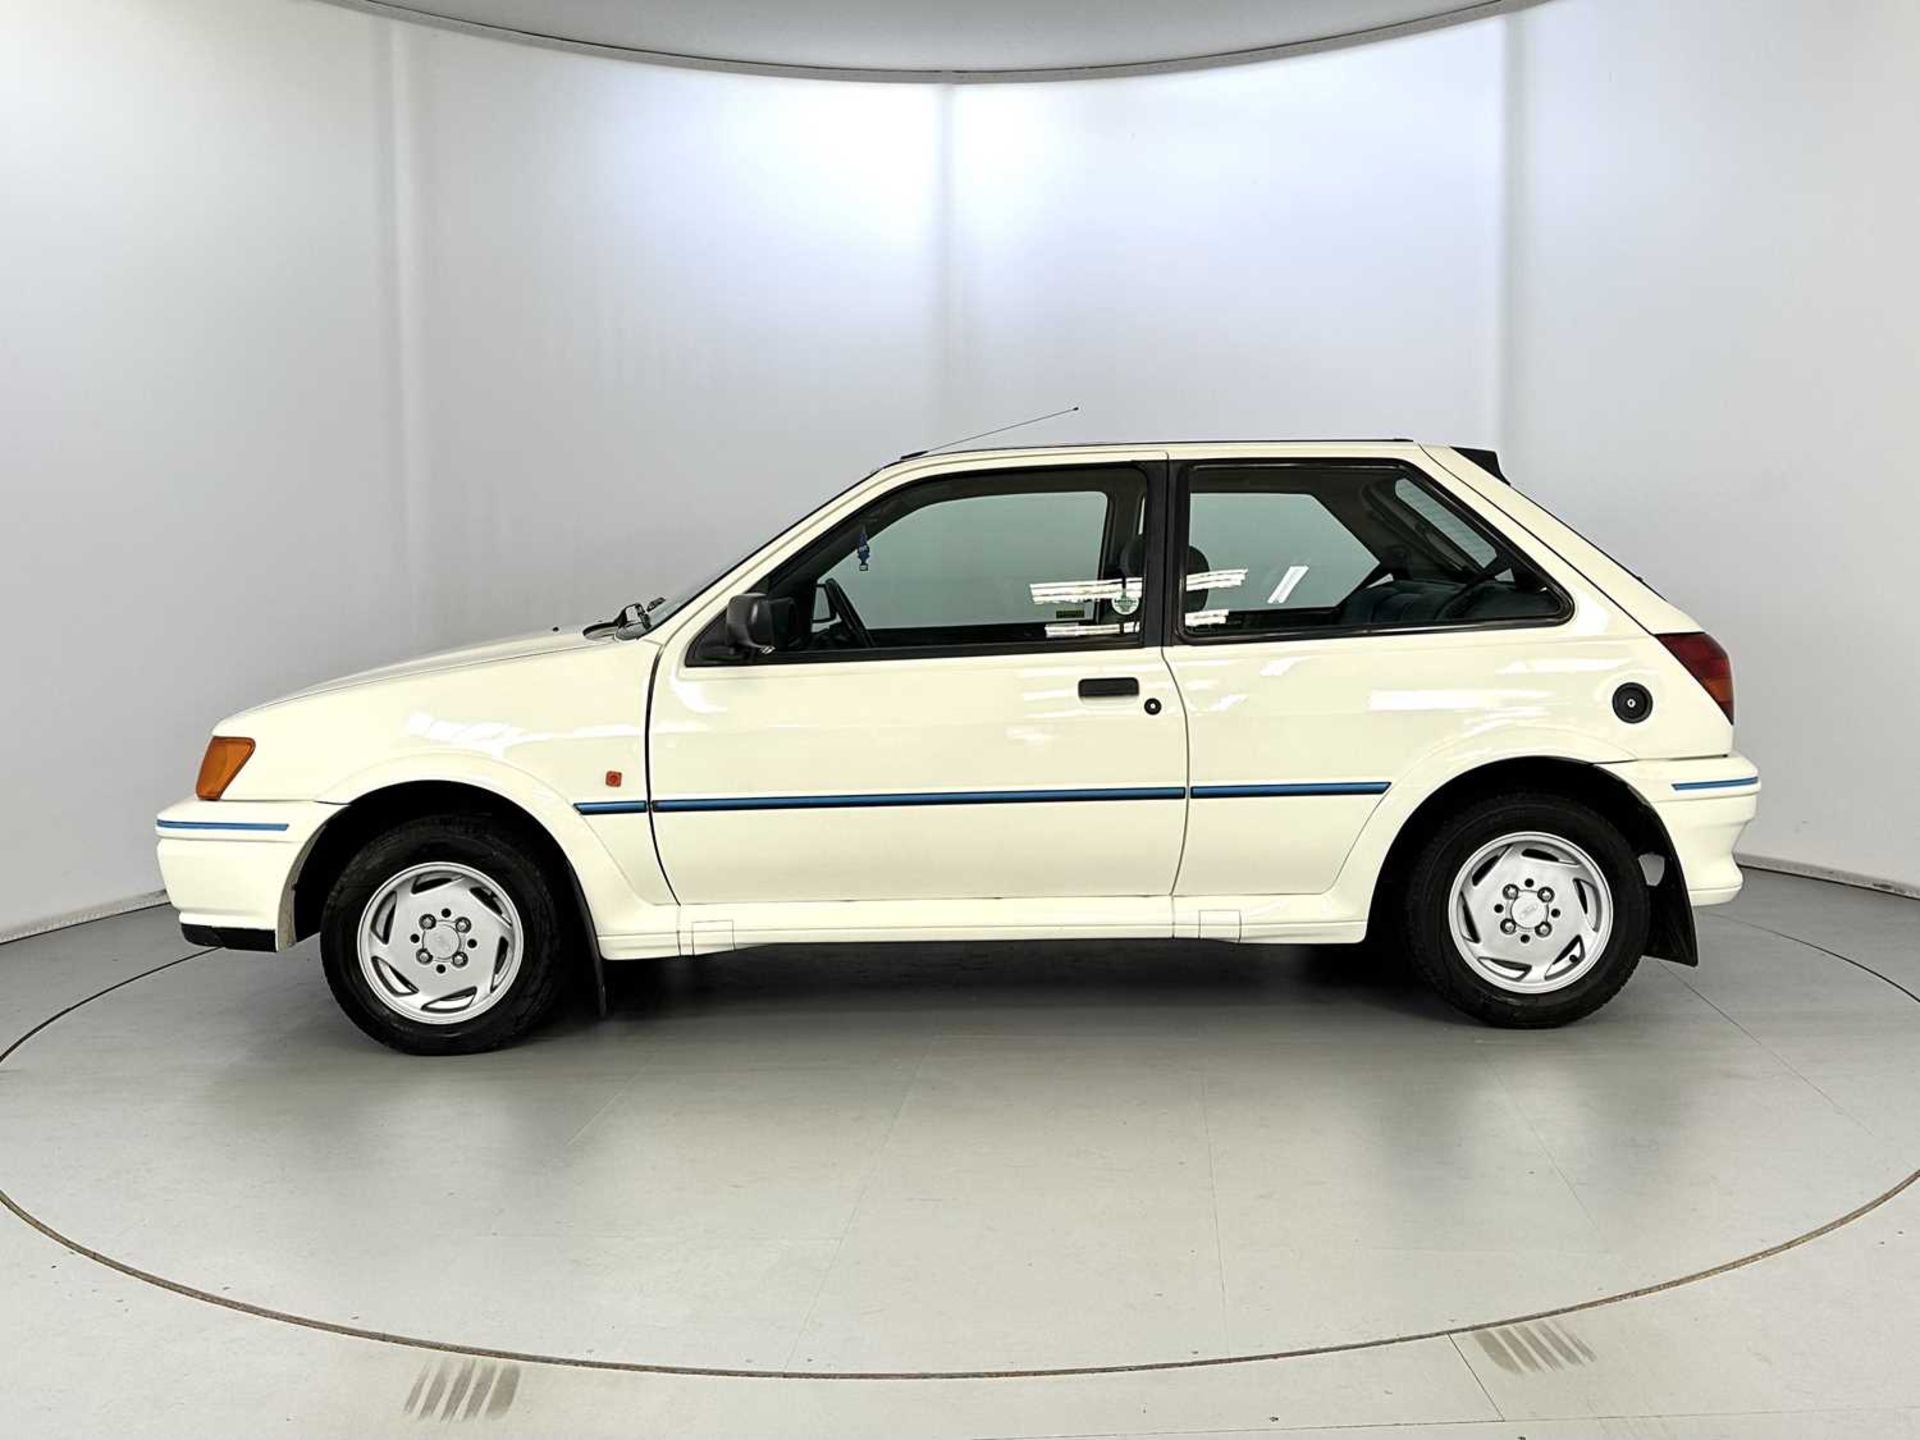 1991 Ford Fiesta XR2i - Image 5 of 30